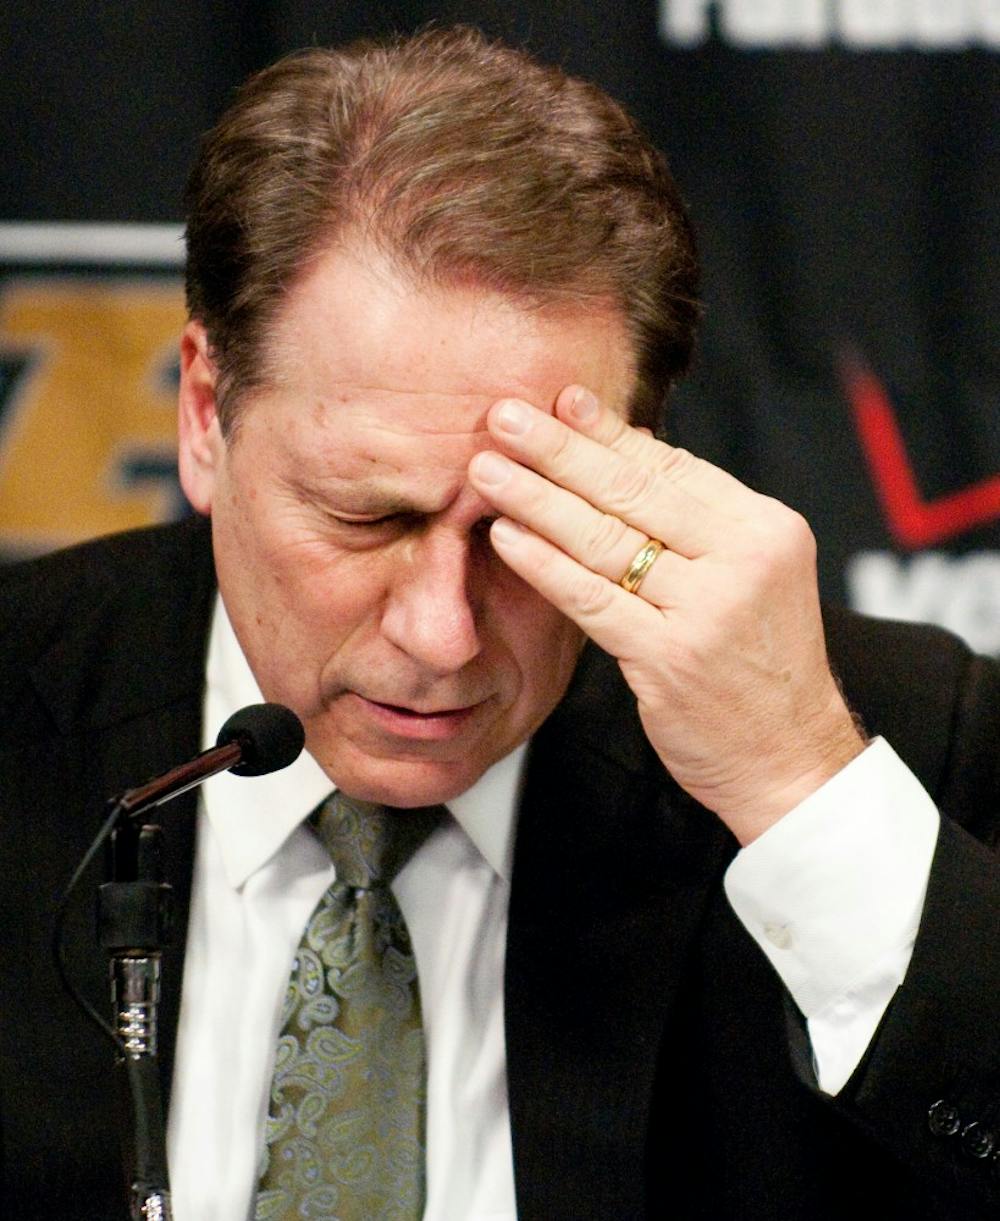 Head coach Tom Izzo pauses while answering questions during the post-game conference on Saturday night at Mackey Arena in West Lafayette, Ind. With the Spartans' 86-76 loss to the Boilermakers, the team is now tied for fourth in the Big Ten race at 4-3 in conference play. Josh Radtke/The State News